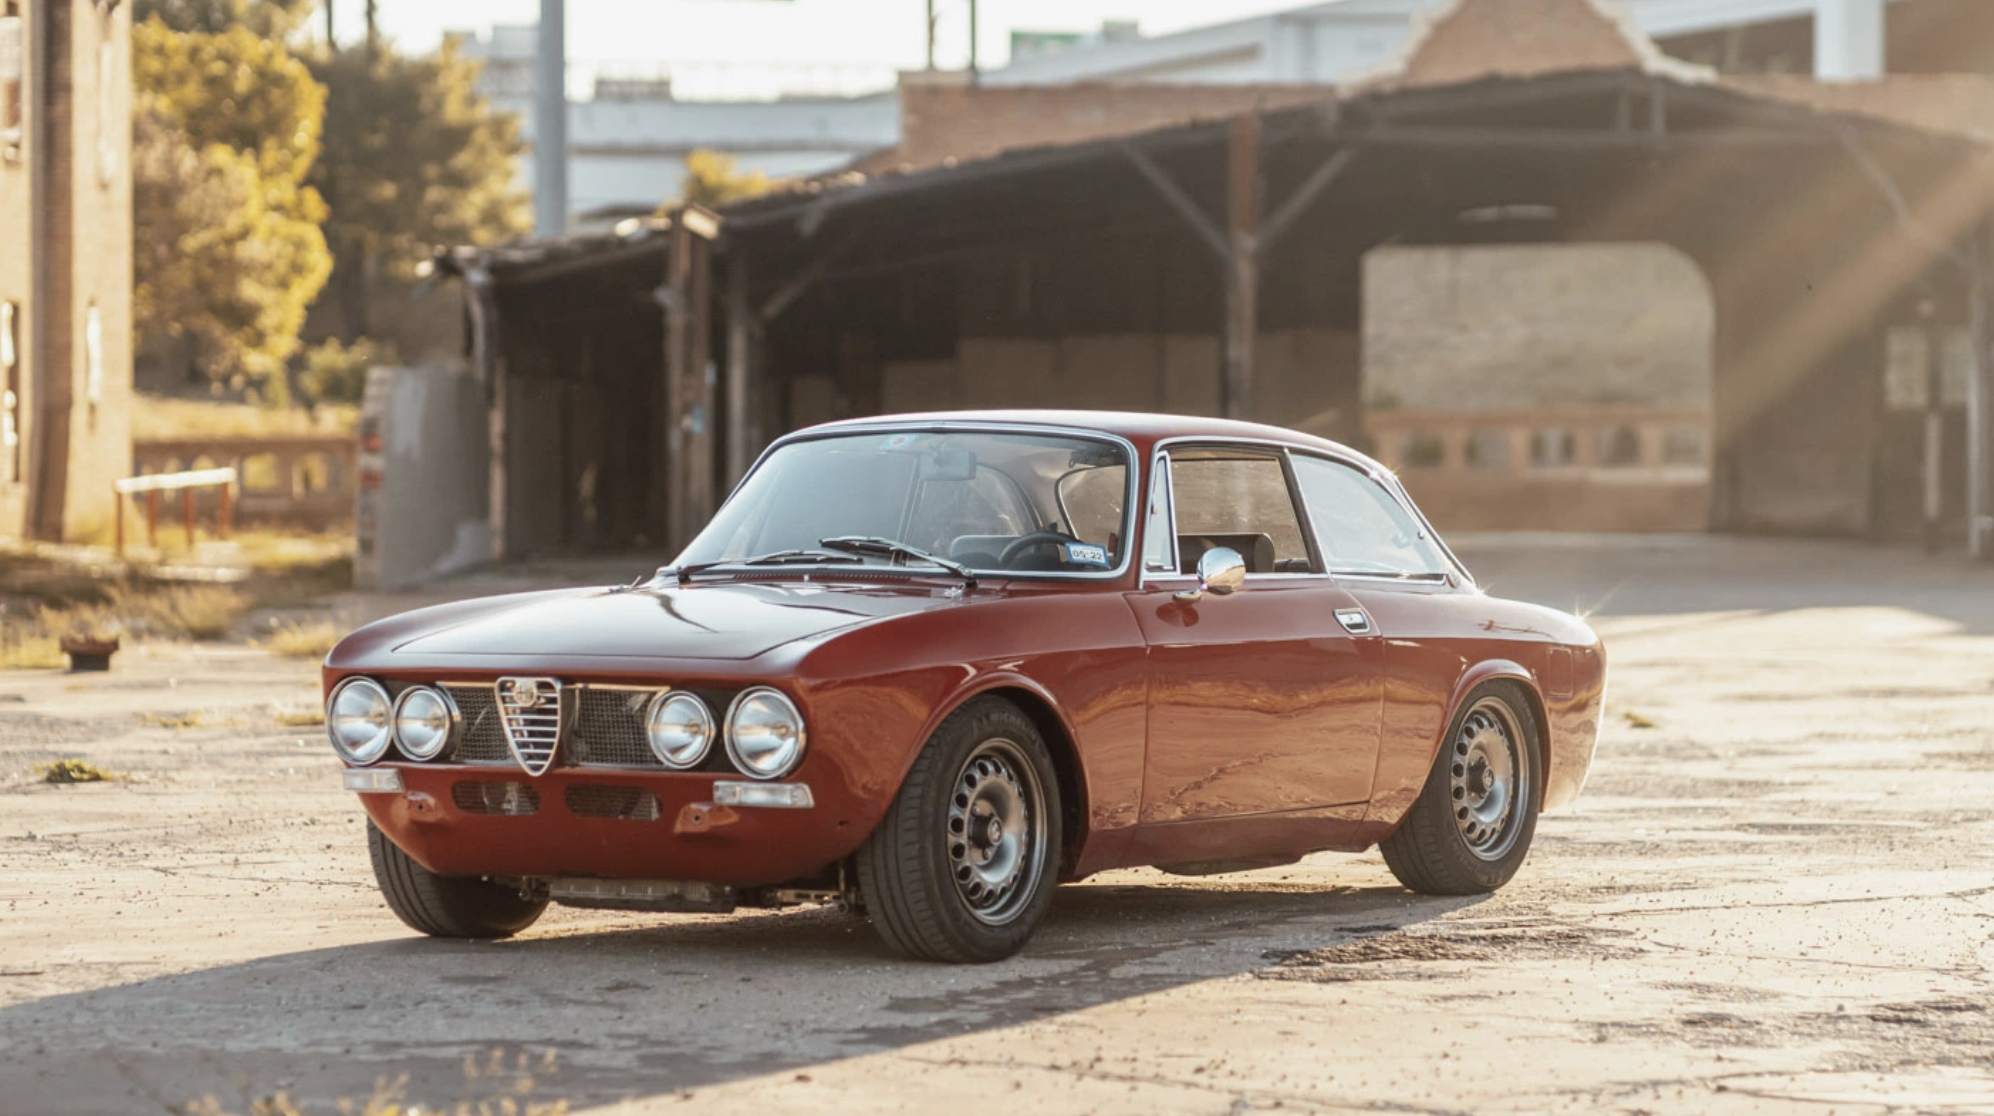 1974 Alfa Romeo Gtv 2000 Is Our Bring A Trailer Auction Pick Of The Day